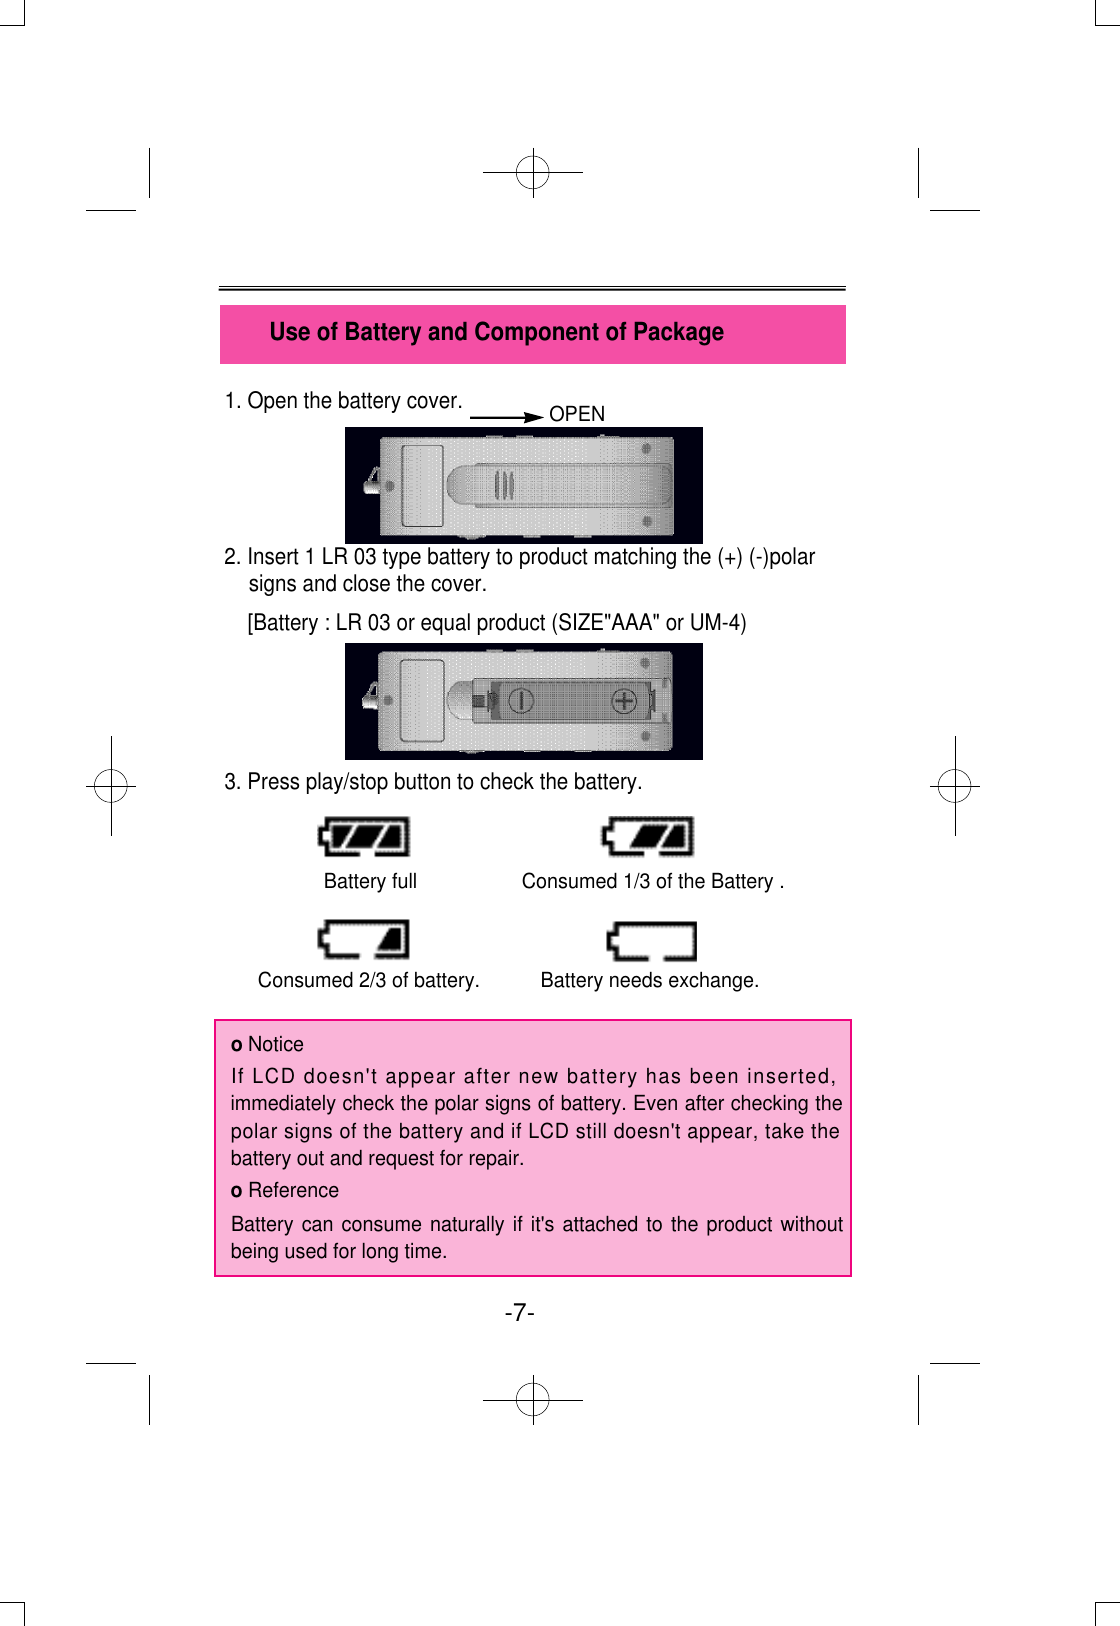 1. Open the battery cover.2. Insert 1 LR 03 type battery to product matching the (+) (-)polarsigns and close the cover.[Battery : LR 03 or equal product (SIZE&quot;AAA&quot; or UM-4)3. Press play/stop button to check the battery.Battery full                   Consumed 1/3 of the Battery .Consumed 2/3 of battery.           Battery needs exchange.o NoticeIf LCD doesn&apos;t appear after new battery has been inserted,immediately check the polar signs of battery. Even after checking thepolar signs of the battery and if LCD still doesn&apos;t appear, take thebattery out and request for repair.o ReferenceBattery can consume naturally if it&apos;s attached to the product withoutbeing used for long time. Use of Battery and Component of Package-7-  OPEN